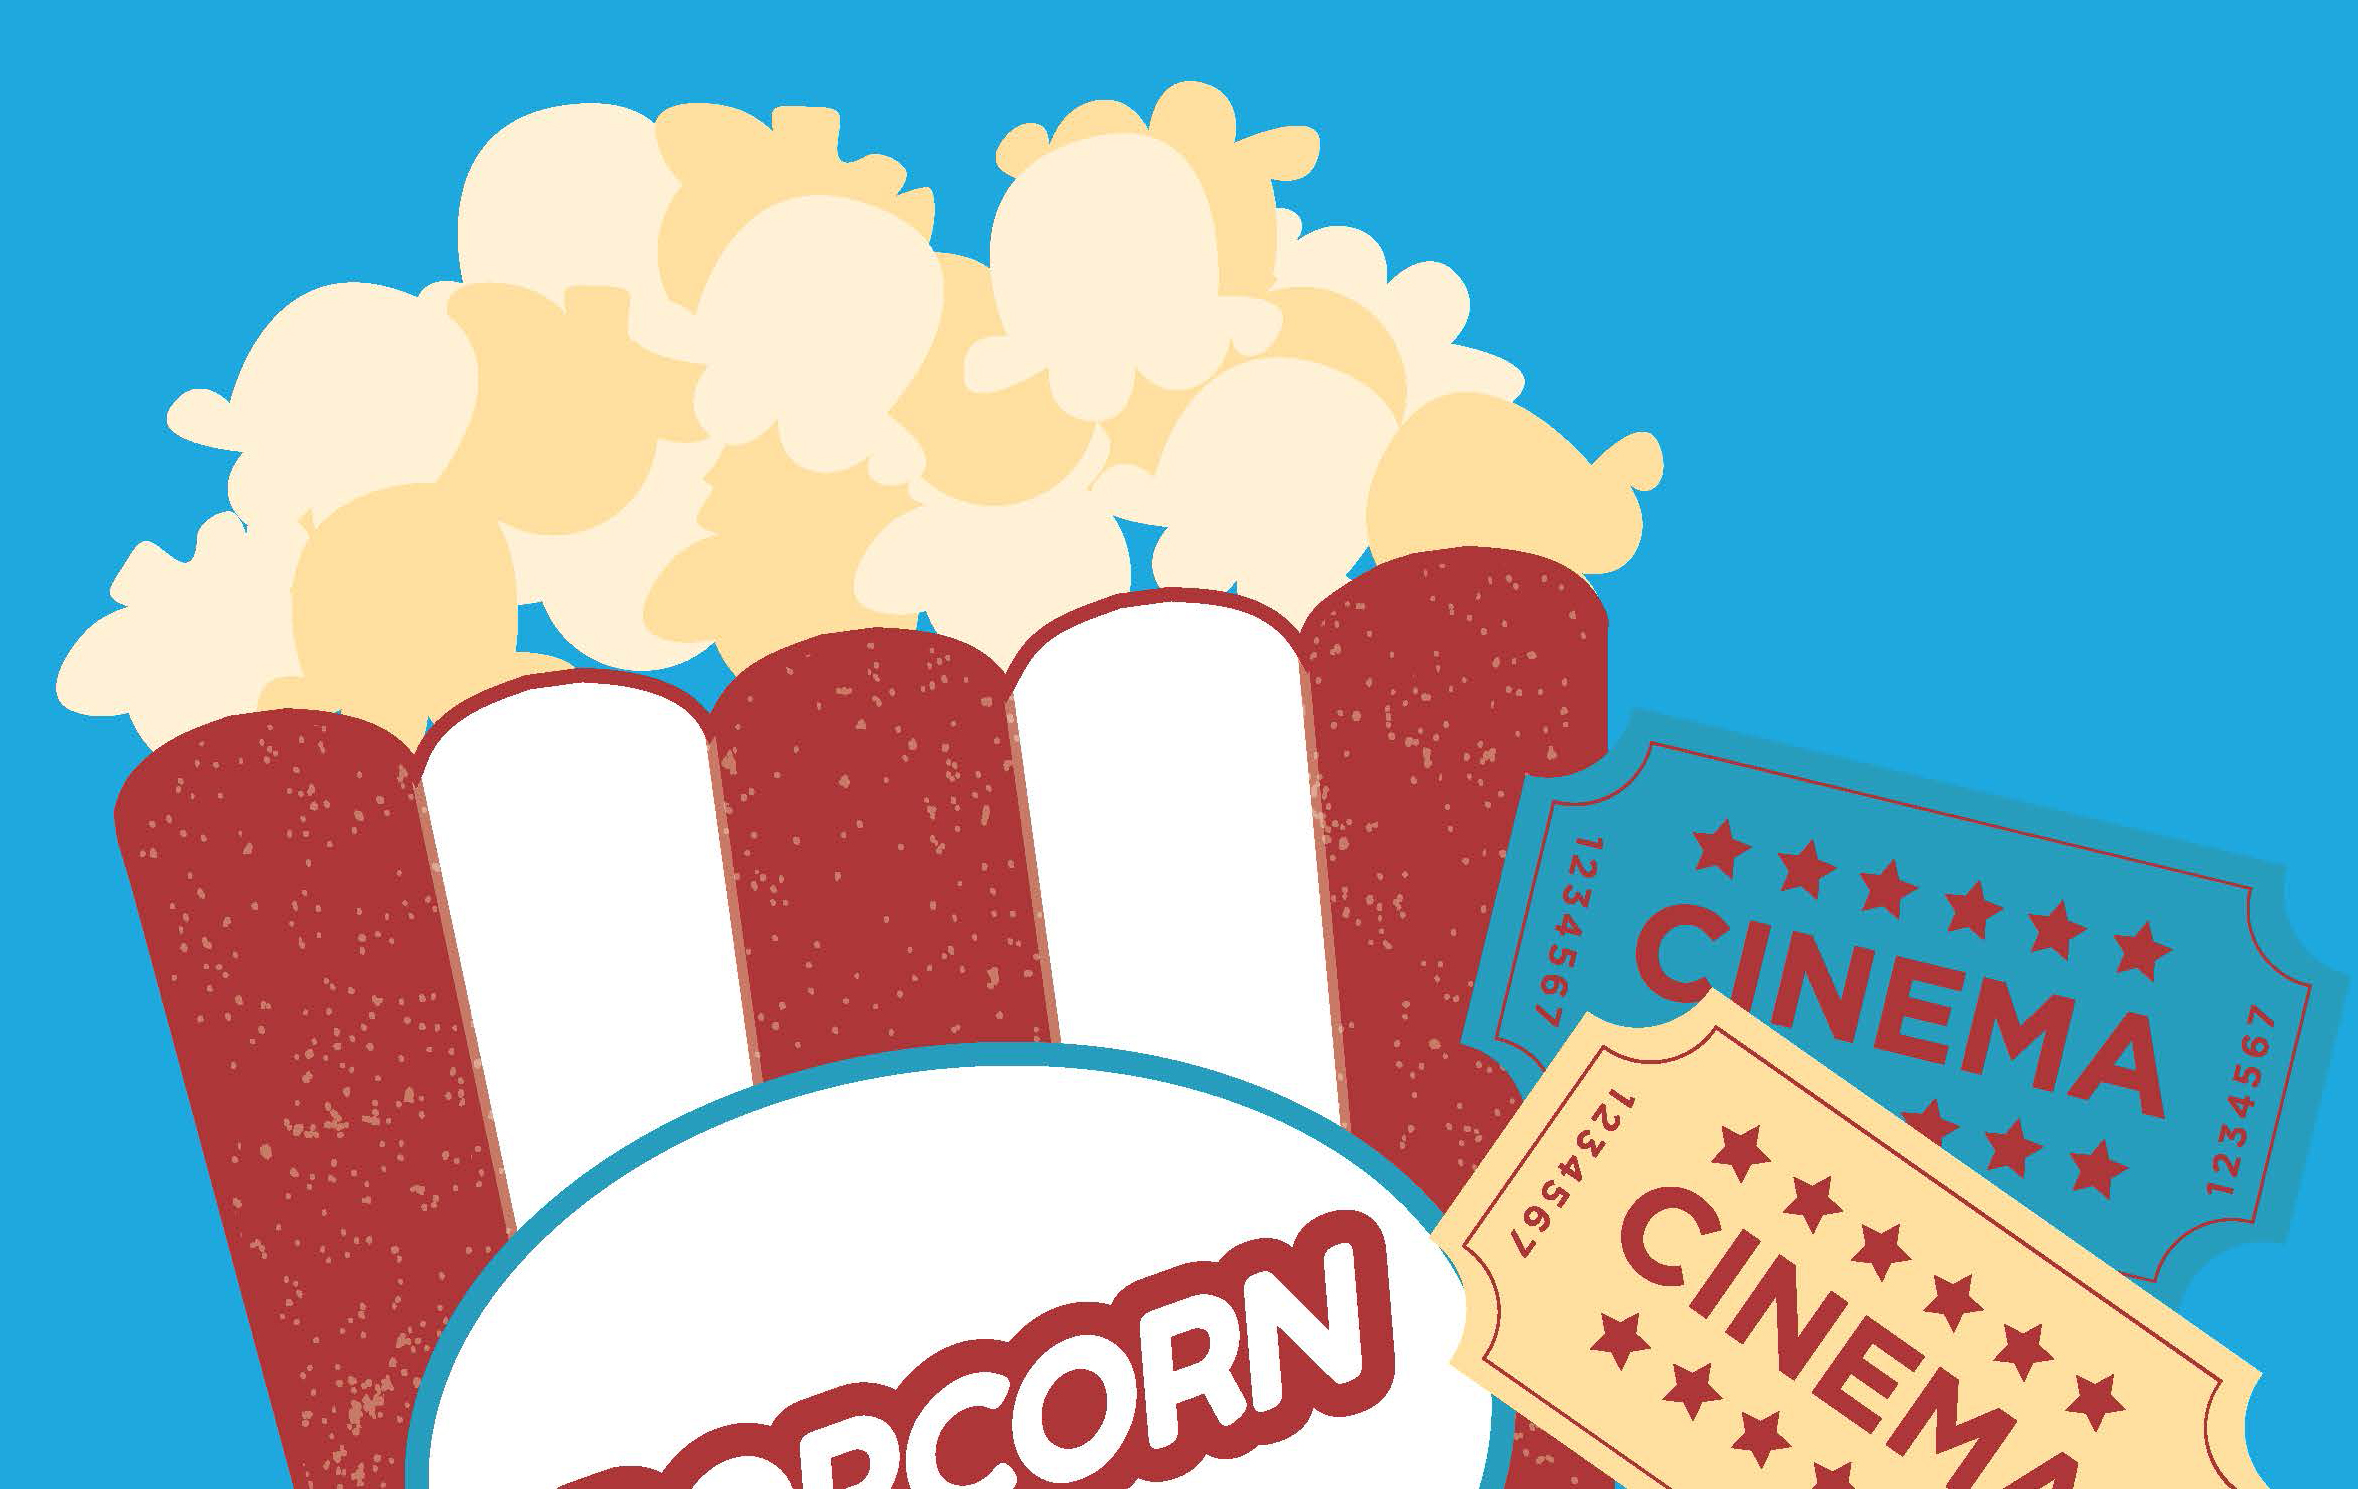 An image of popcorn and two movie tickets against a blue background